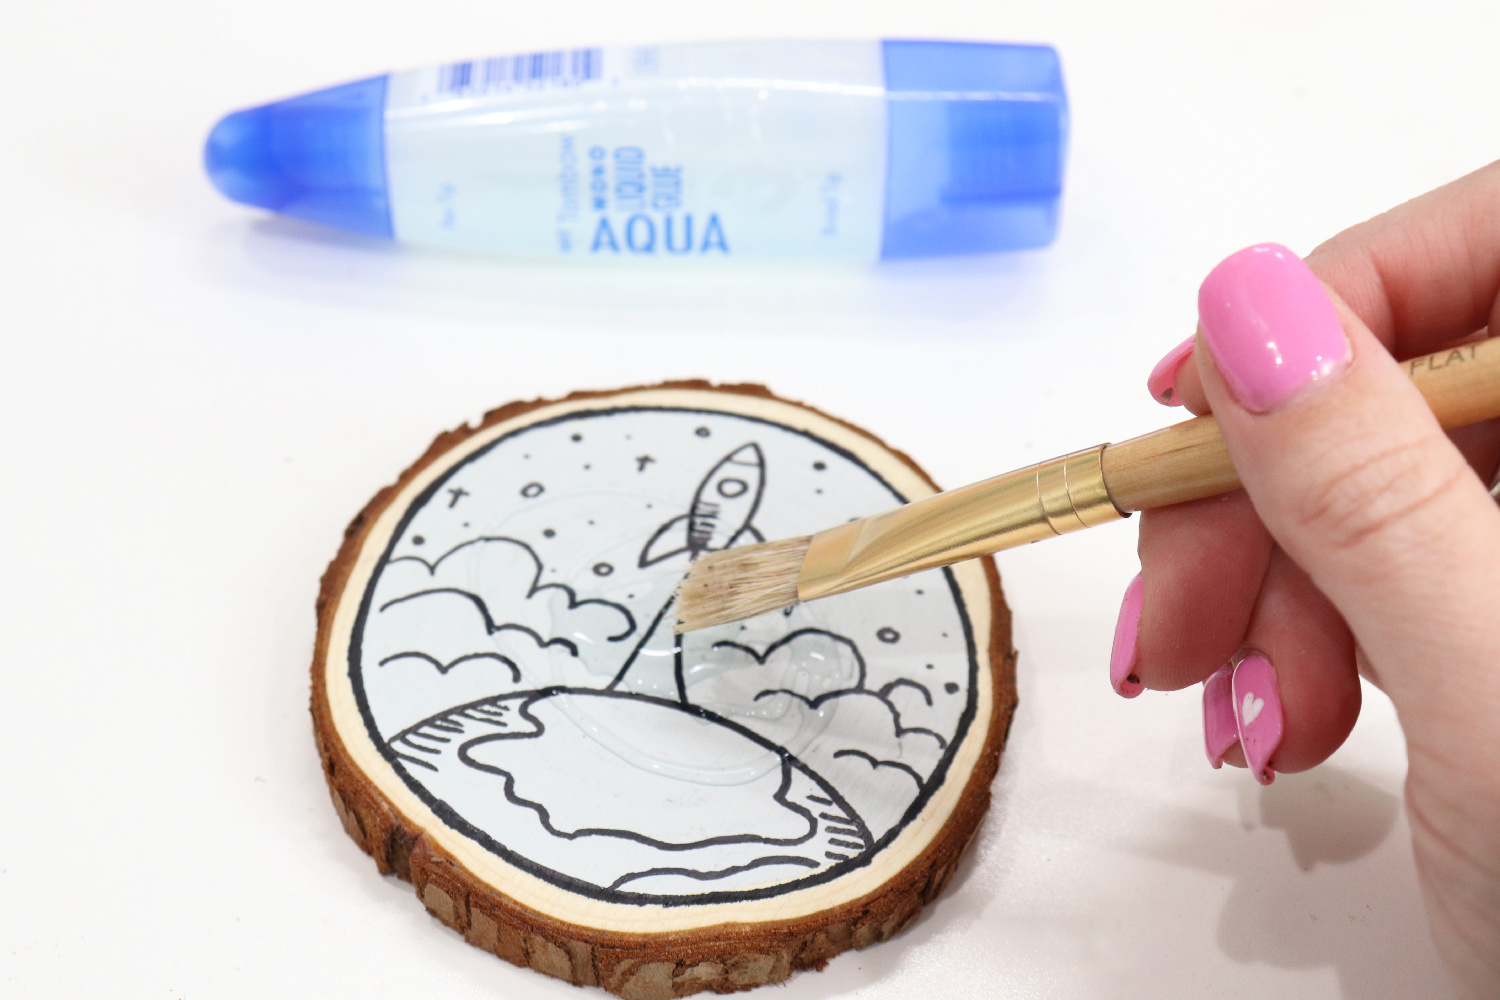 Image contains Amy’s hand holding a paintbrush and spreading MONO Aqua Liquid Glue on the surface of the wood slice coaster. The tube of glue sits nearby.